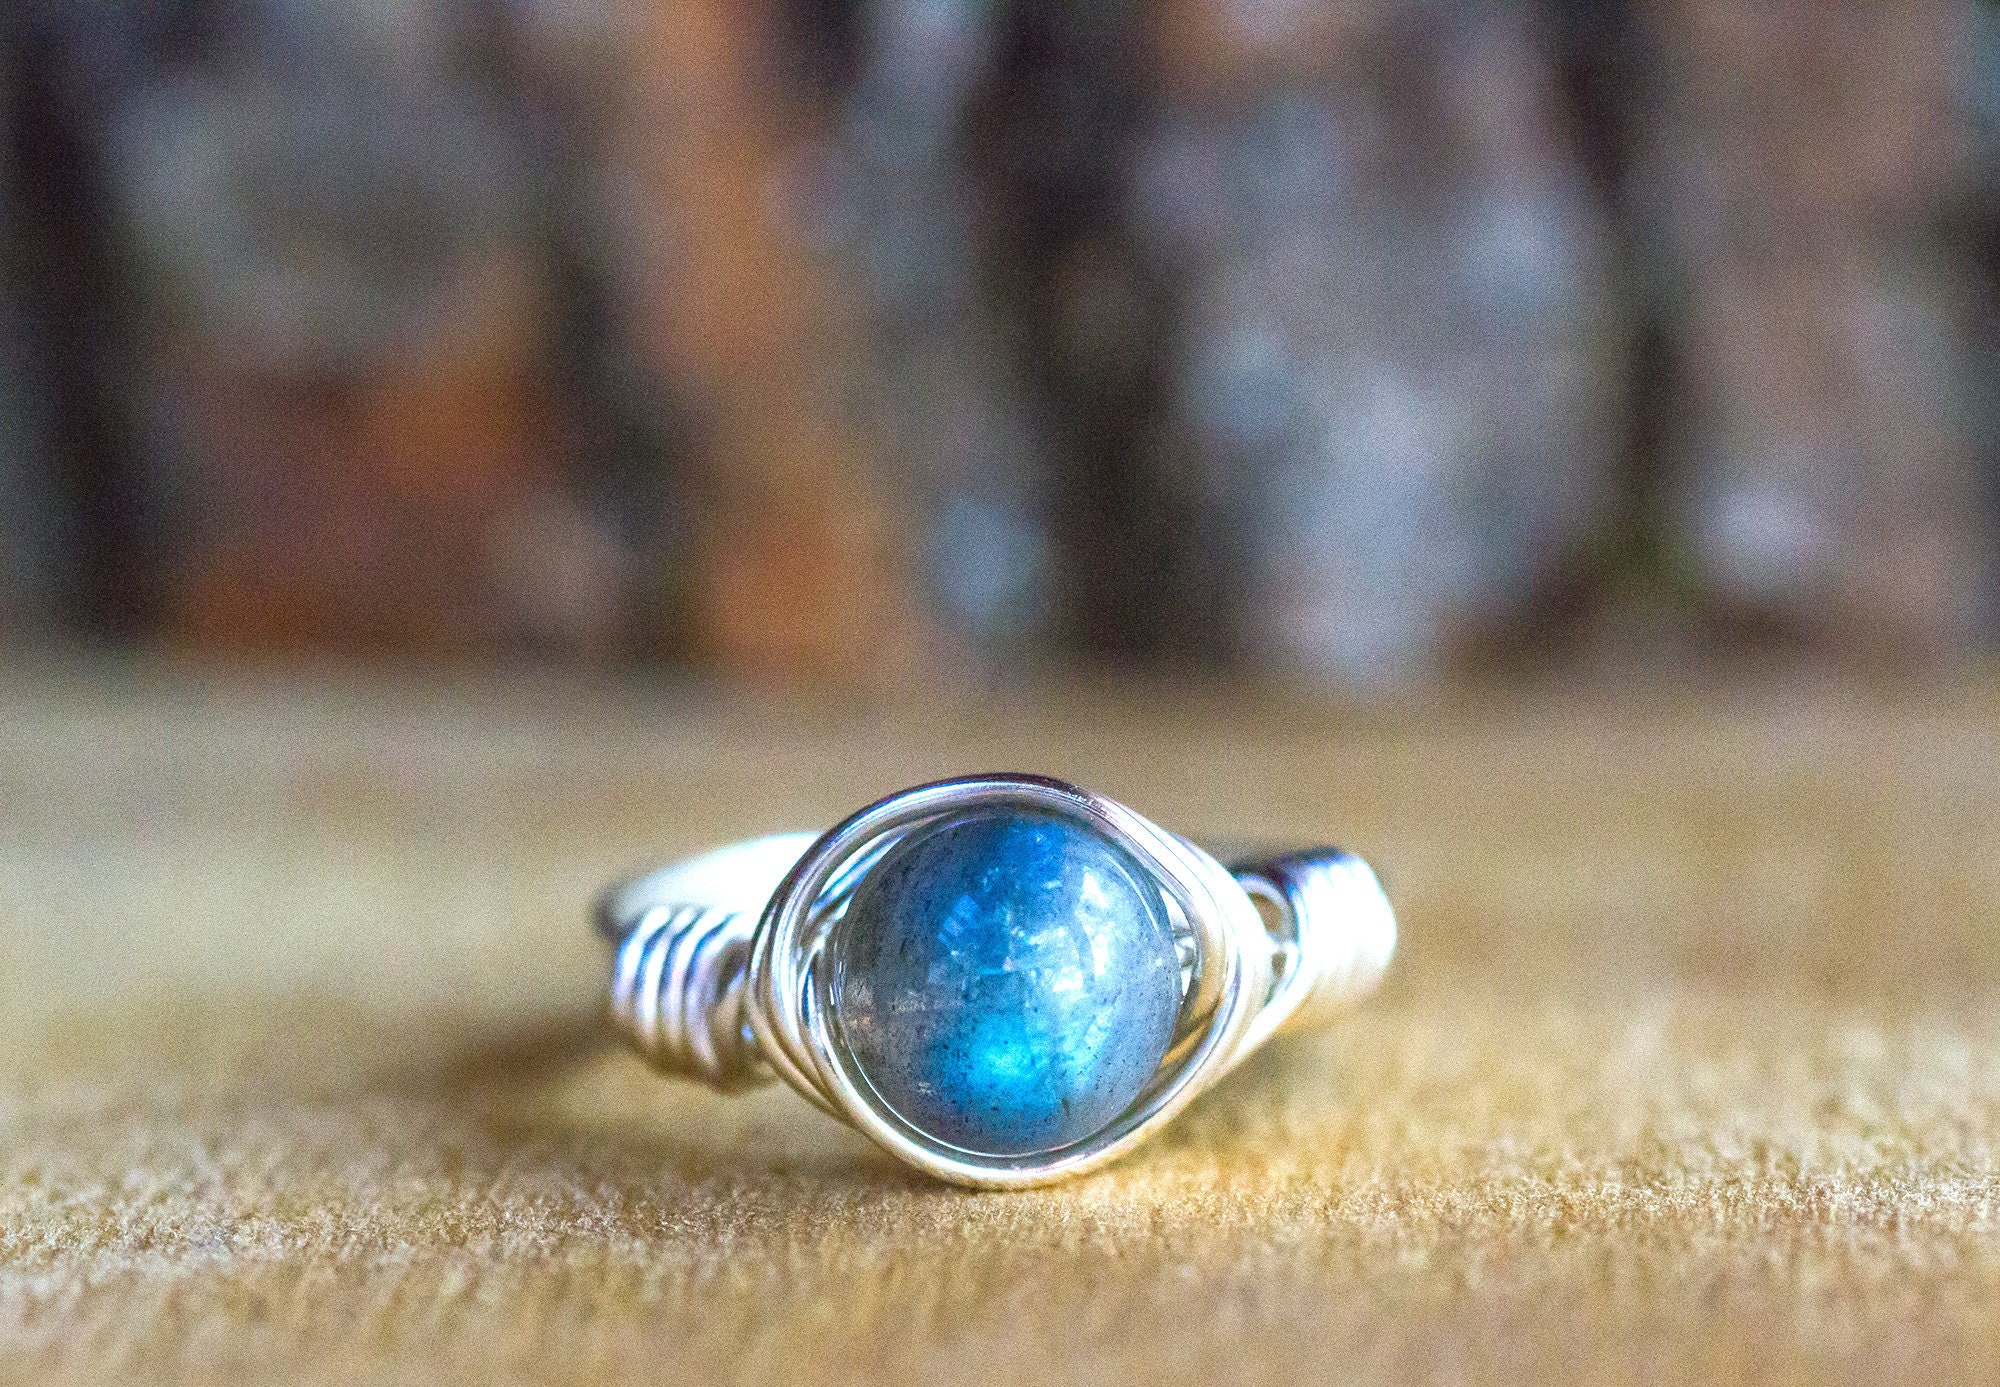 Crystal Healing. Handmade Jewelry Size 6 Labradorite Wire Wrapped Ring Sterling Silver Wire Wrapped Labradorite